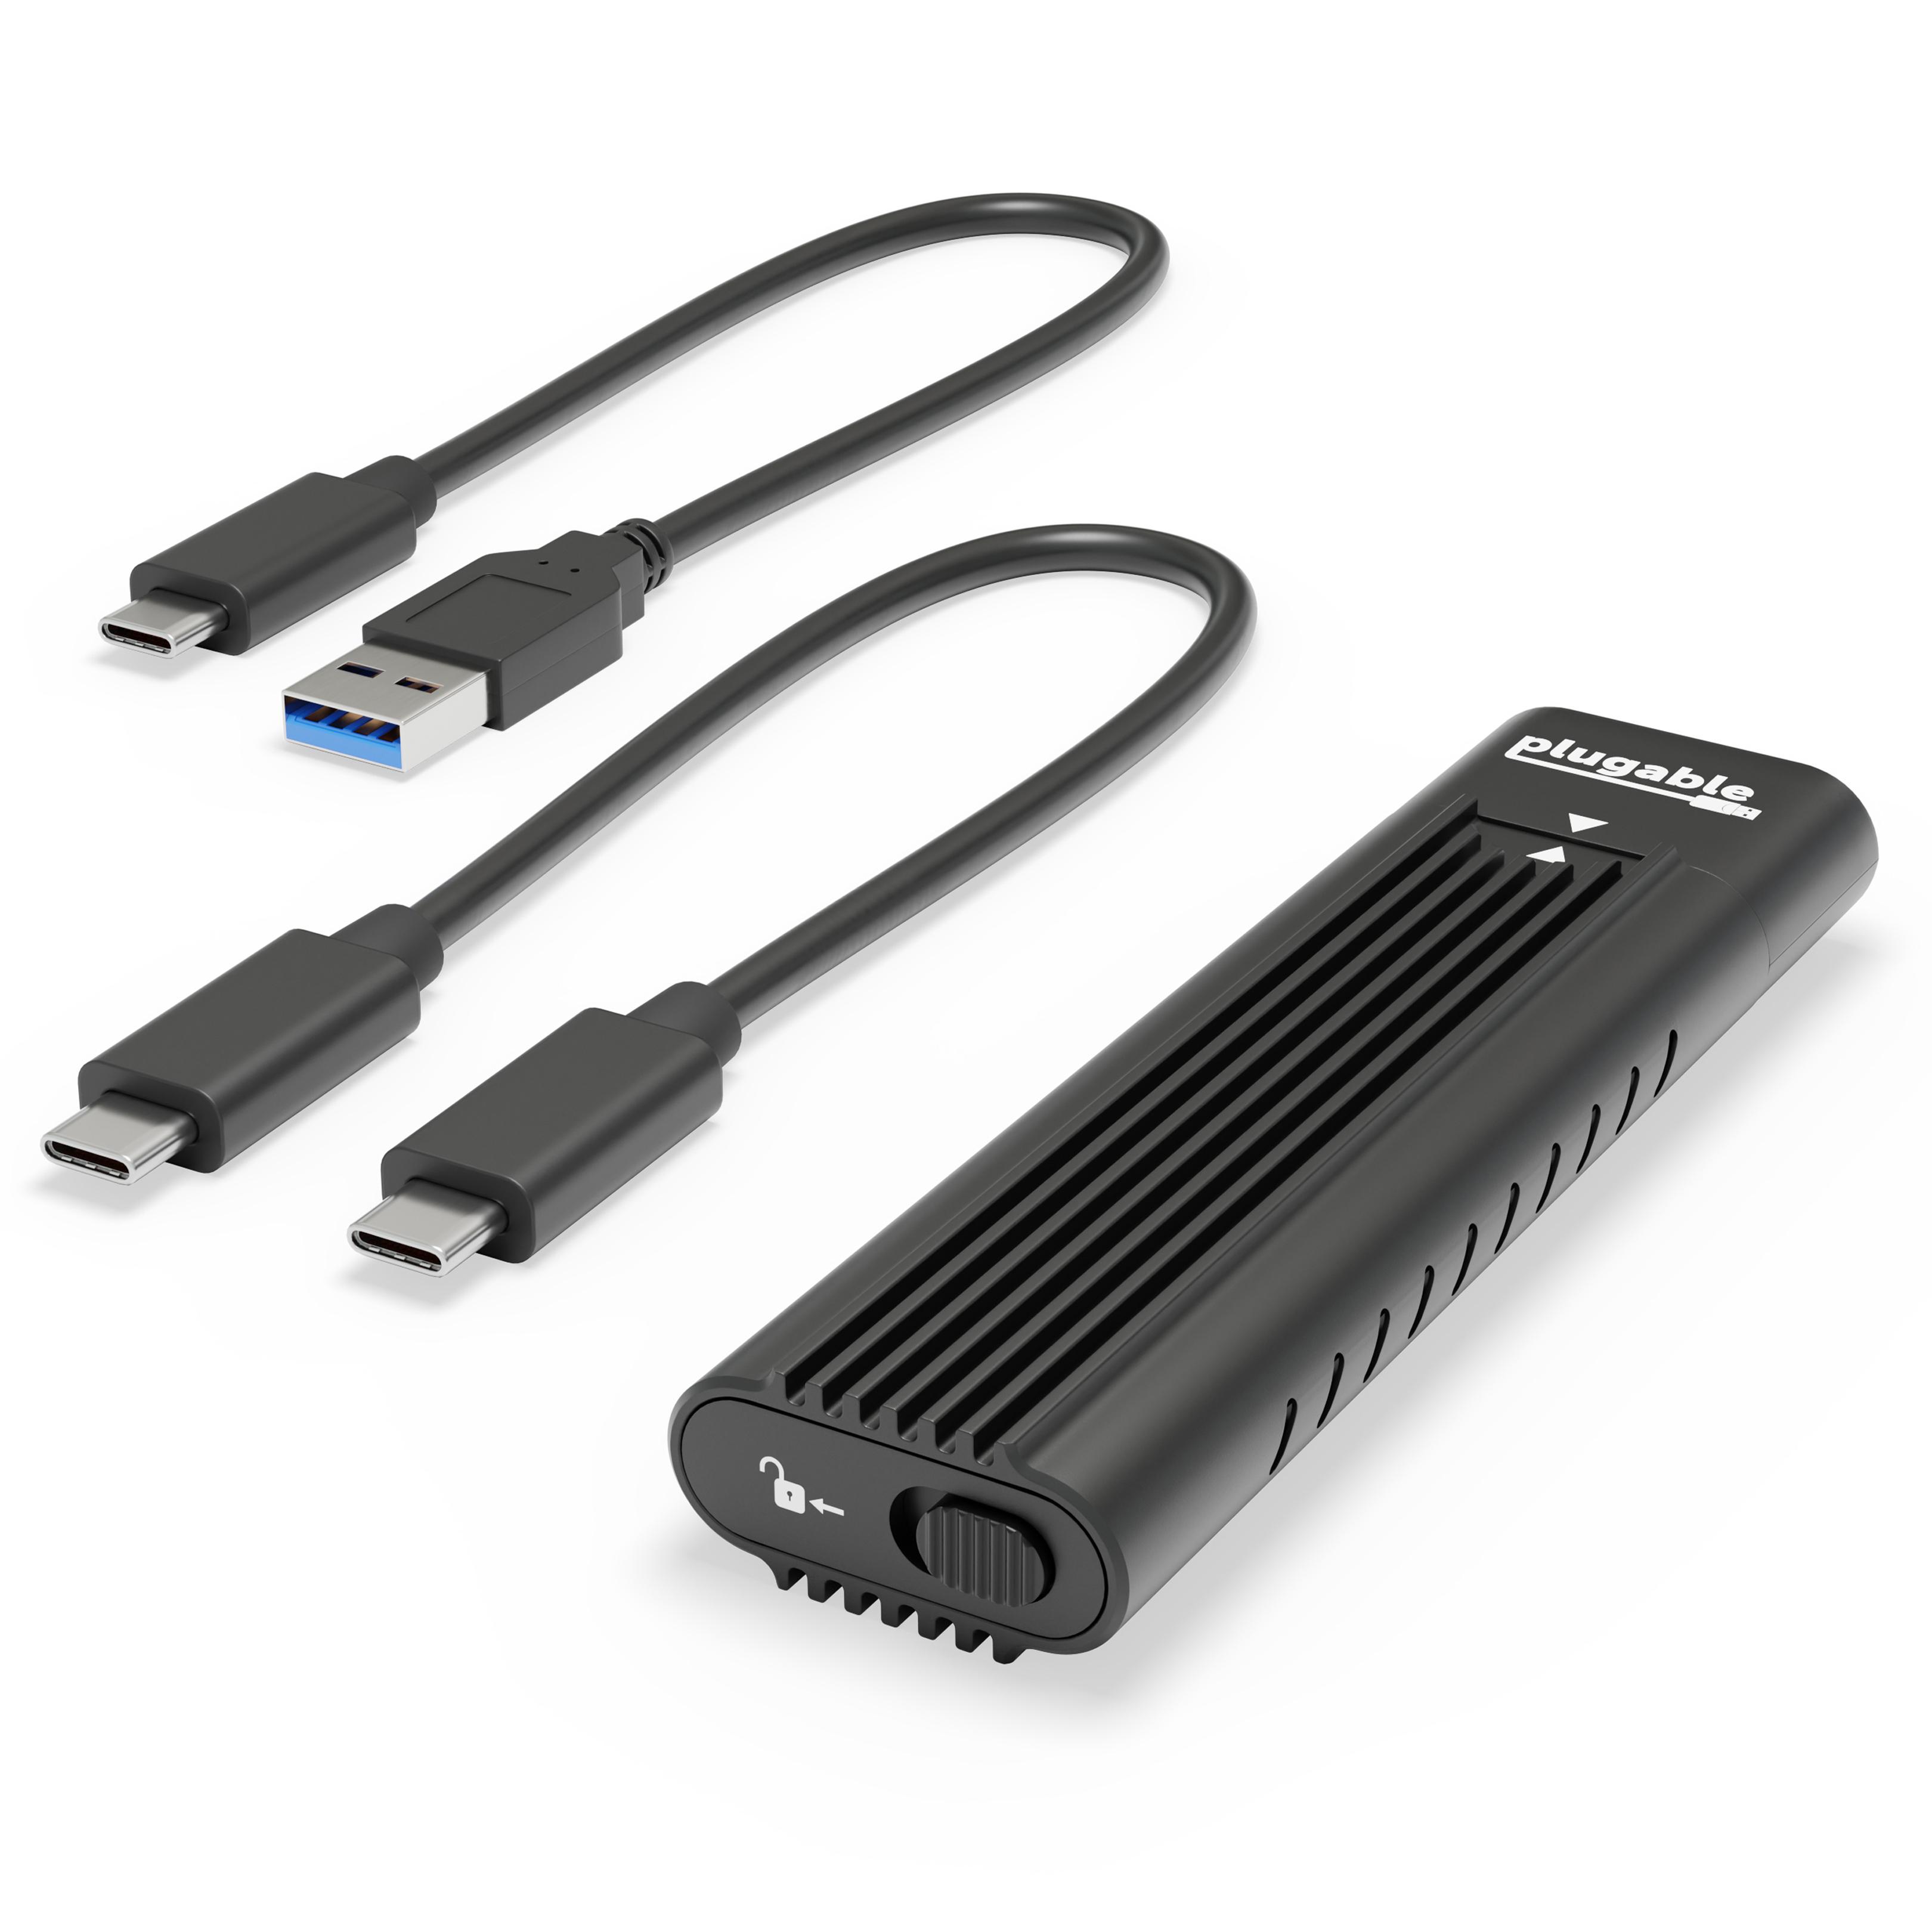 10Gbps BYEASY M.2 NVMe SSD Enclosure Adapter with USB C/Thunderbolt 3 Compatible up to USB 3.1 Gen 2 Speeds Includes USB-C and USB 3.0 Cables HD-01 Supports EVO 970 NVMe SSDs 2280 2260 2242 2230 